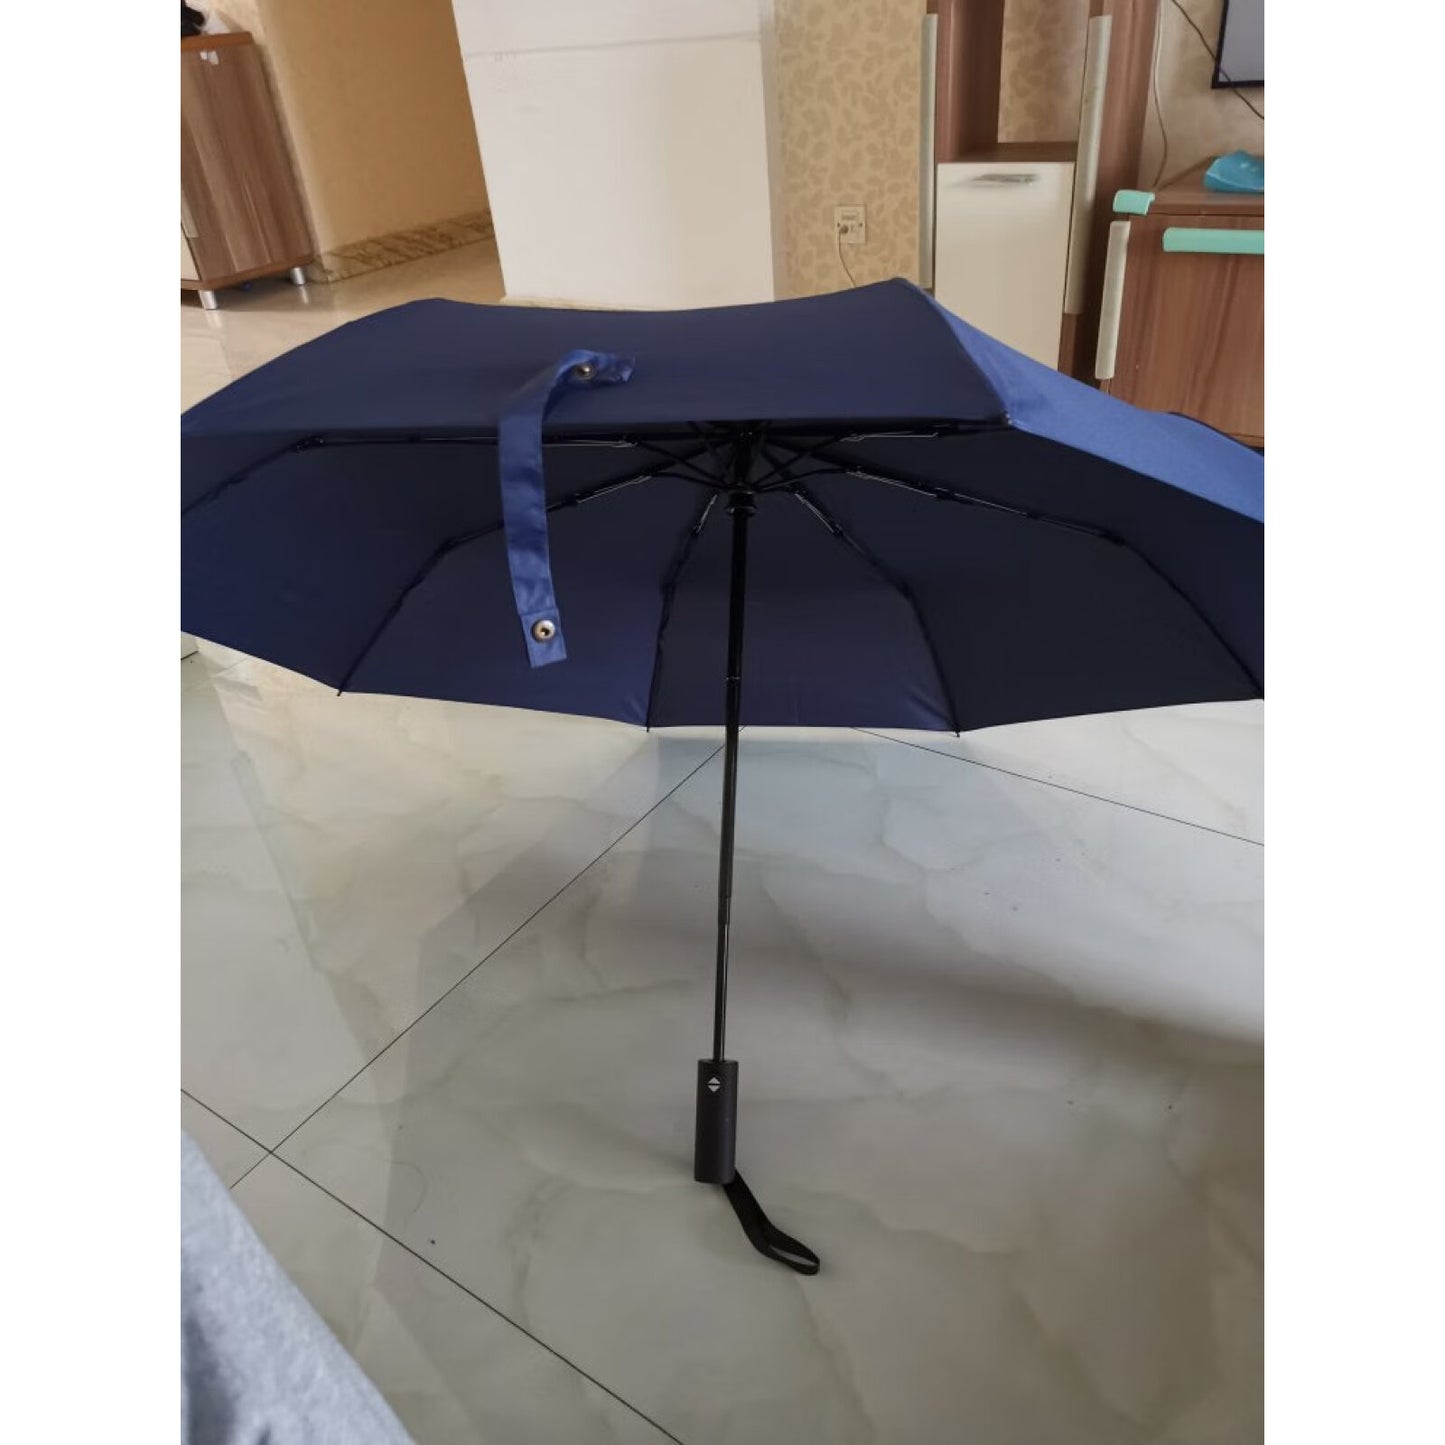 FACEMADE Windproof Travel Umbrella - Wind Resistant, Small - Compact, Light, Automatic, Strong Steel Shaft, Mini, Folding and Portable - Backpack, Car, Purse Umbrellas for Rain - Men and Women